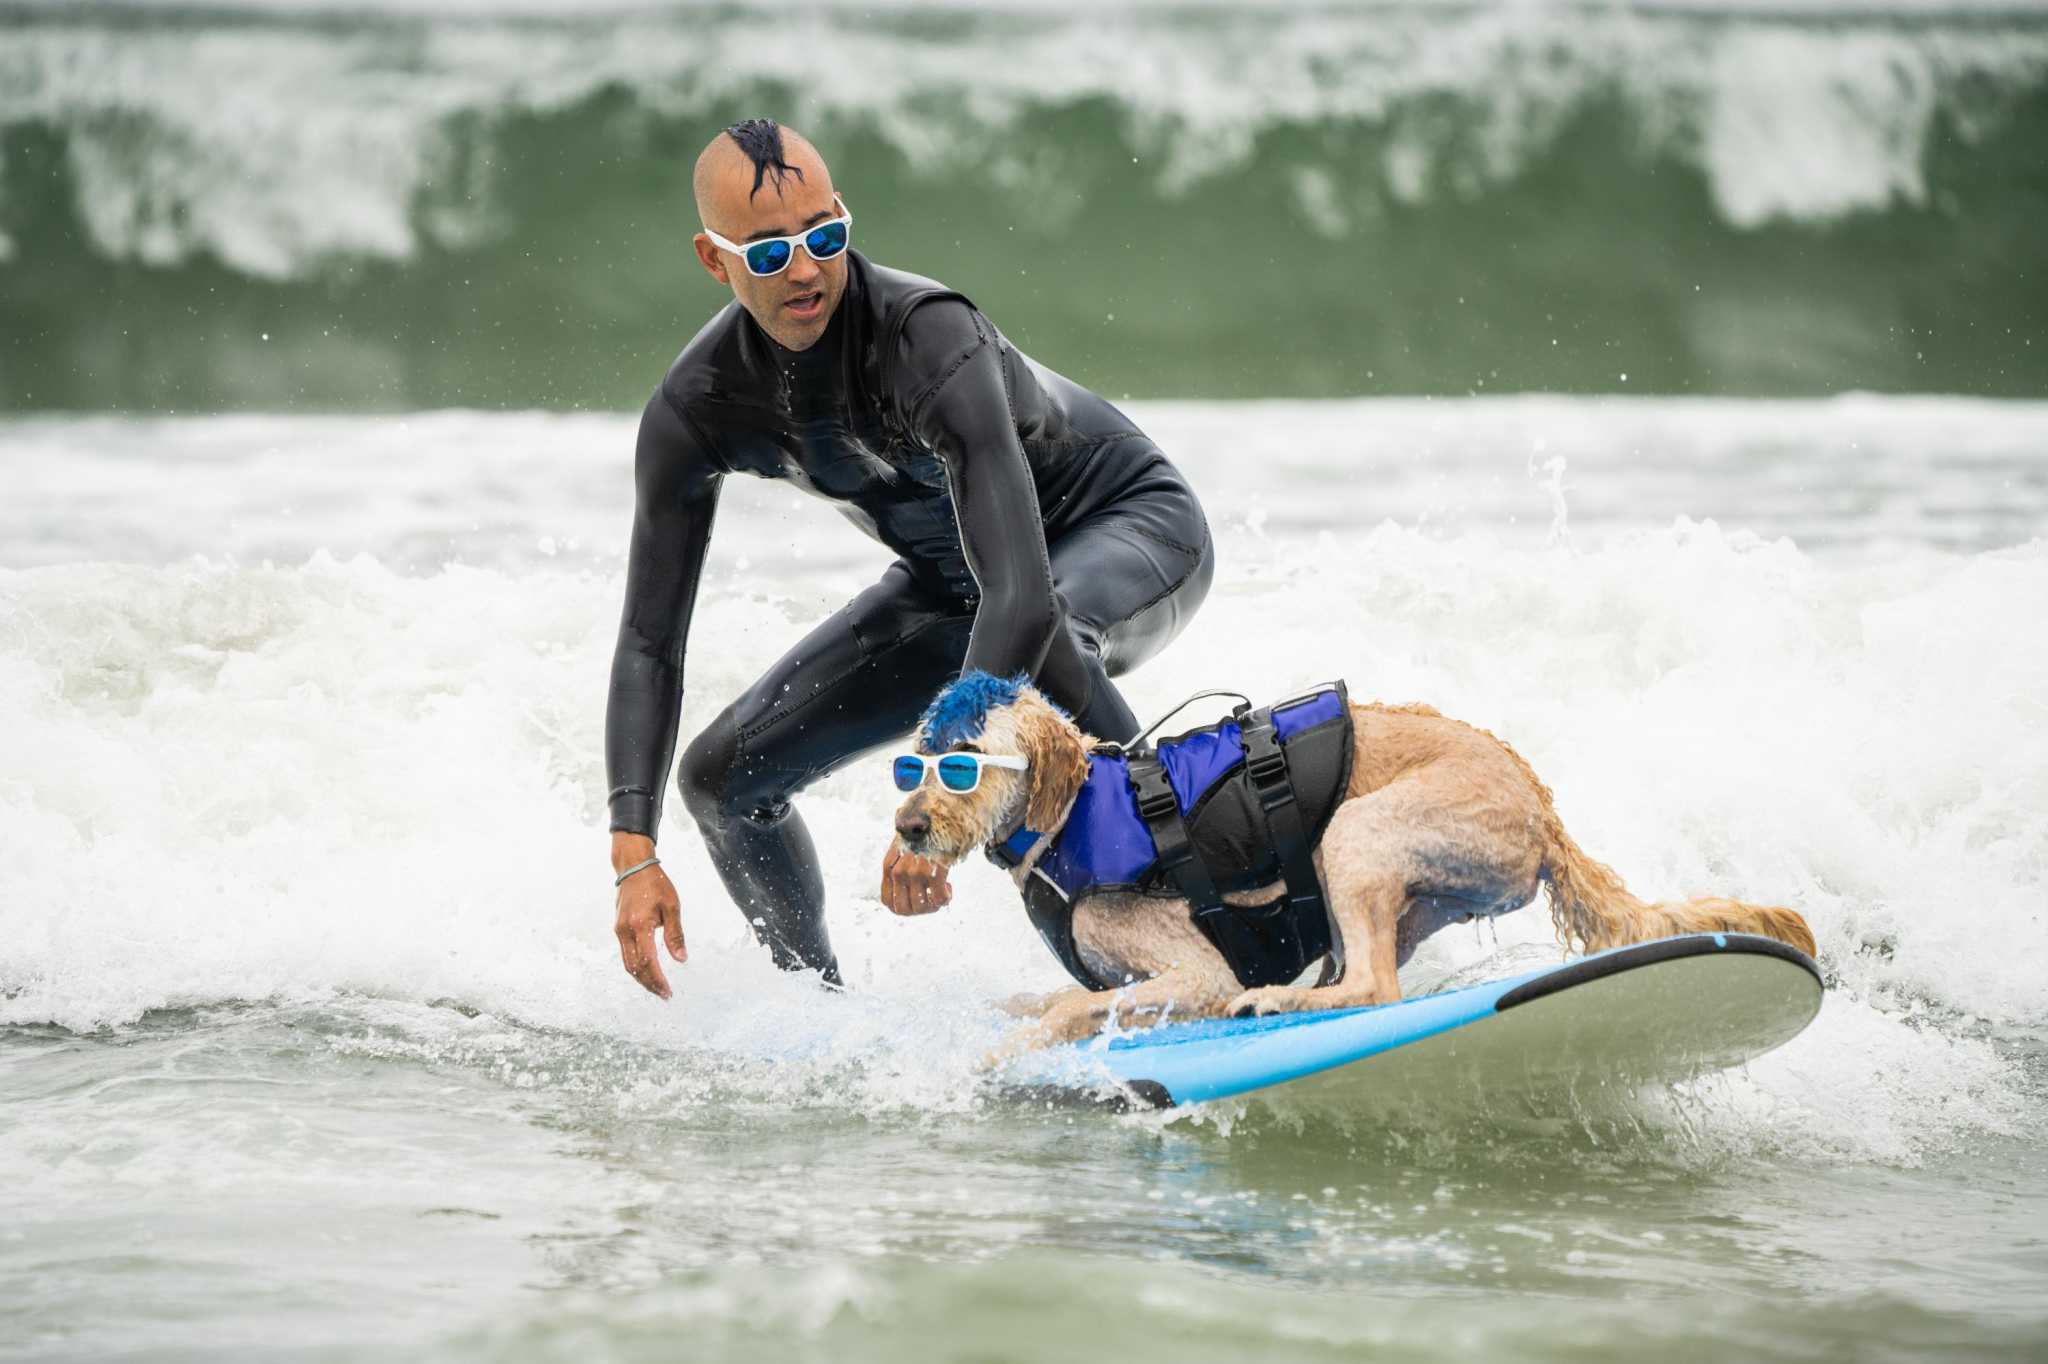 Man and dog surfing